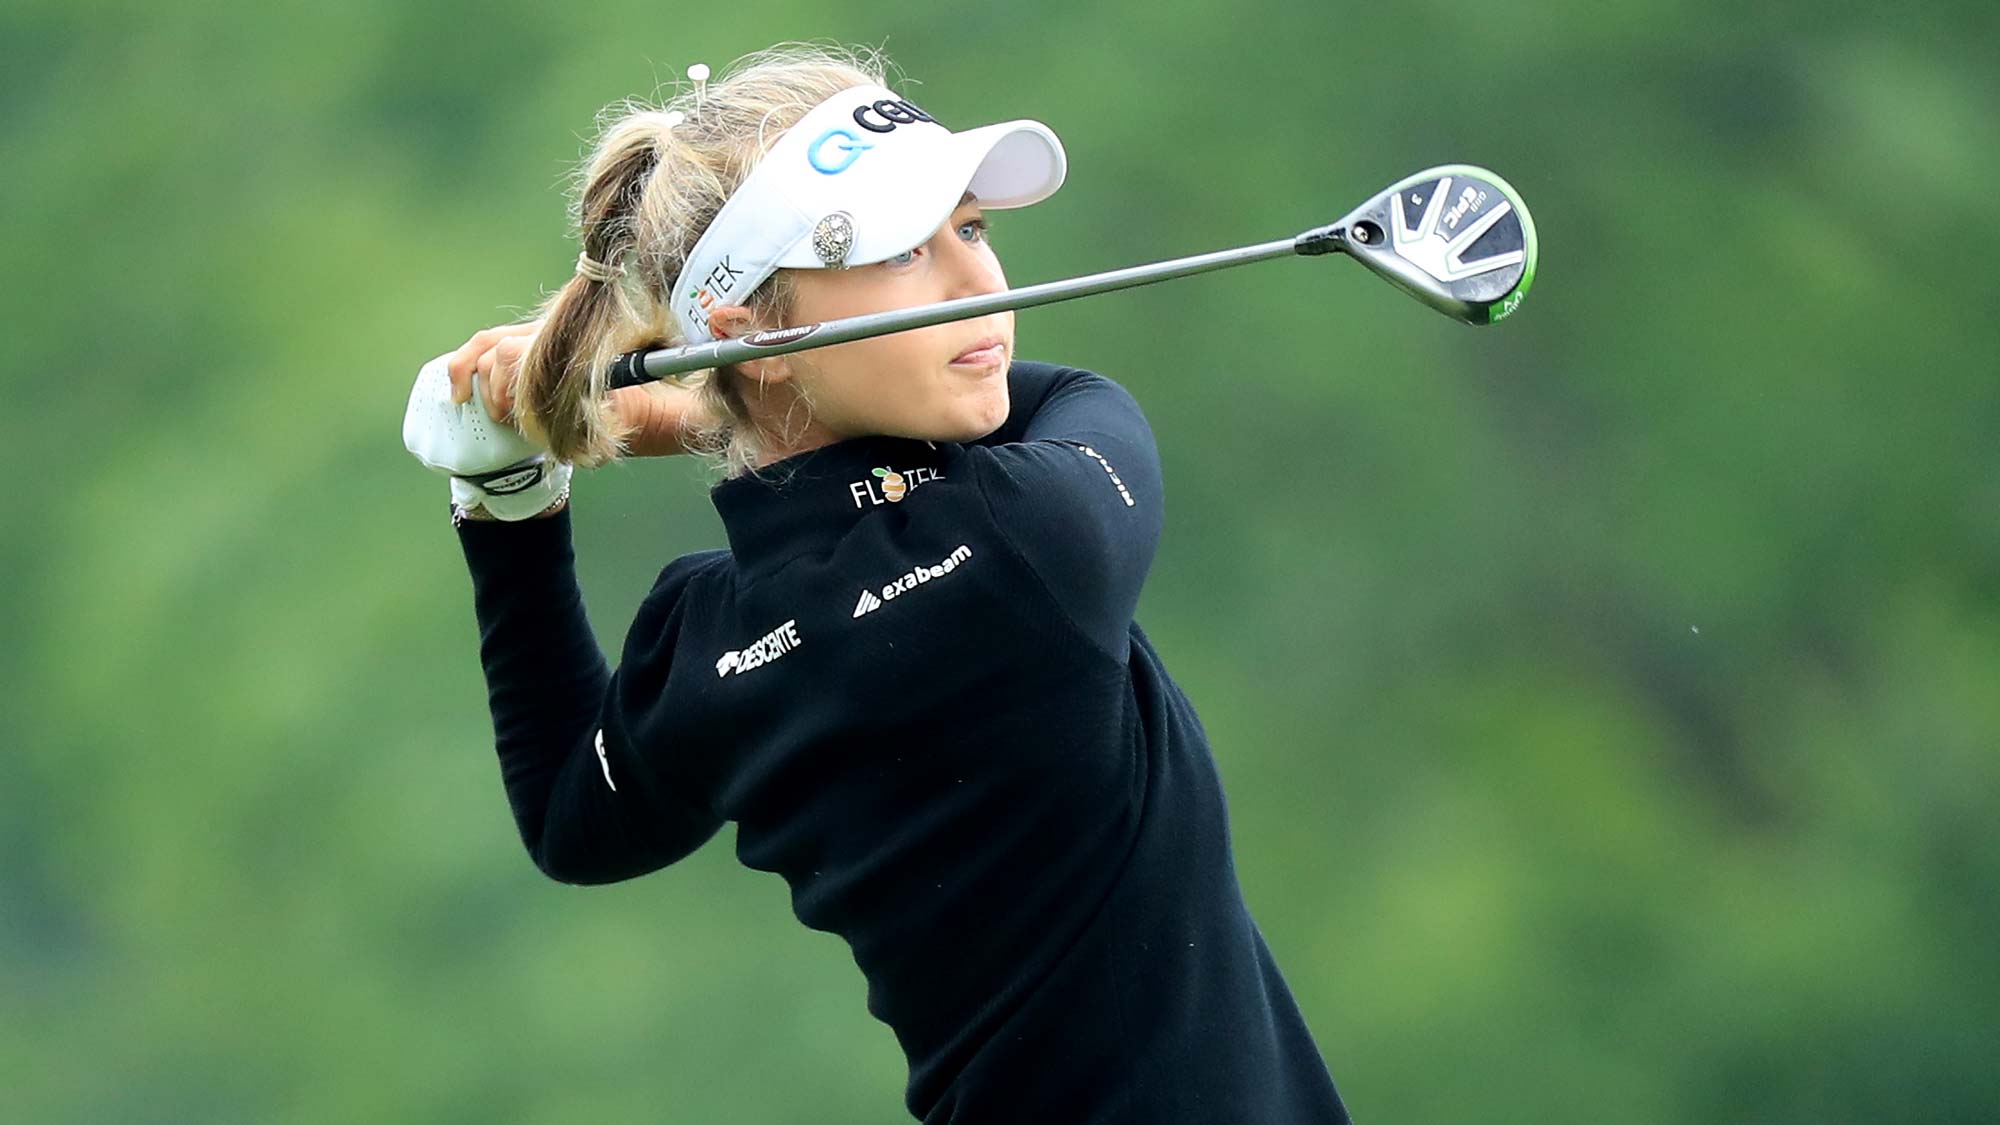 Nelly Korda of the United States plays her tee shot on the par 5, third hole during the final round of the 2019 KPMG Women's PGA Championship